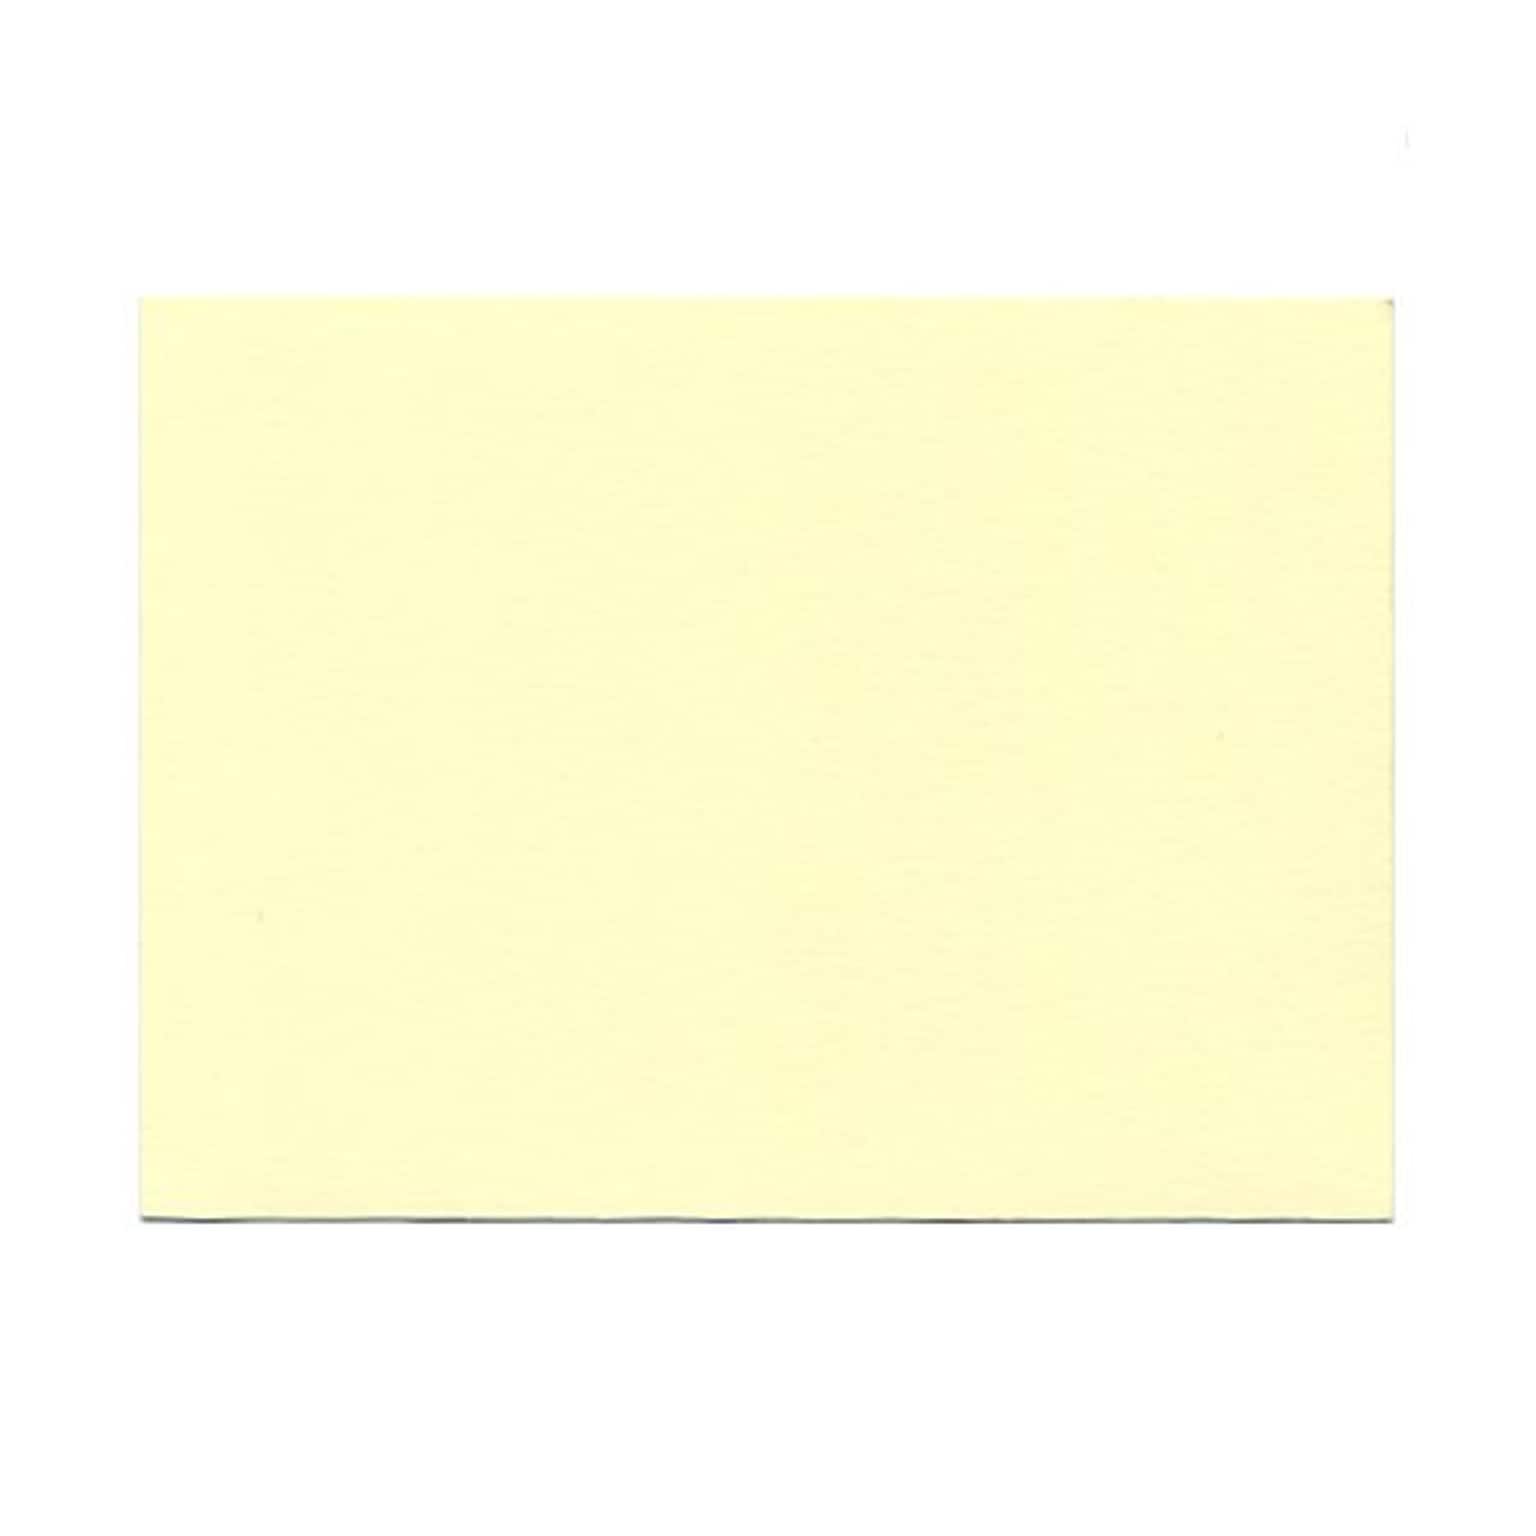 JAM Paper® Blank Note Cards, A6 size, 4 5/8 x 6 1/4, Ivory, 100/pack (175991)